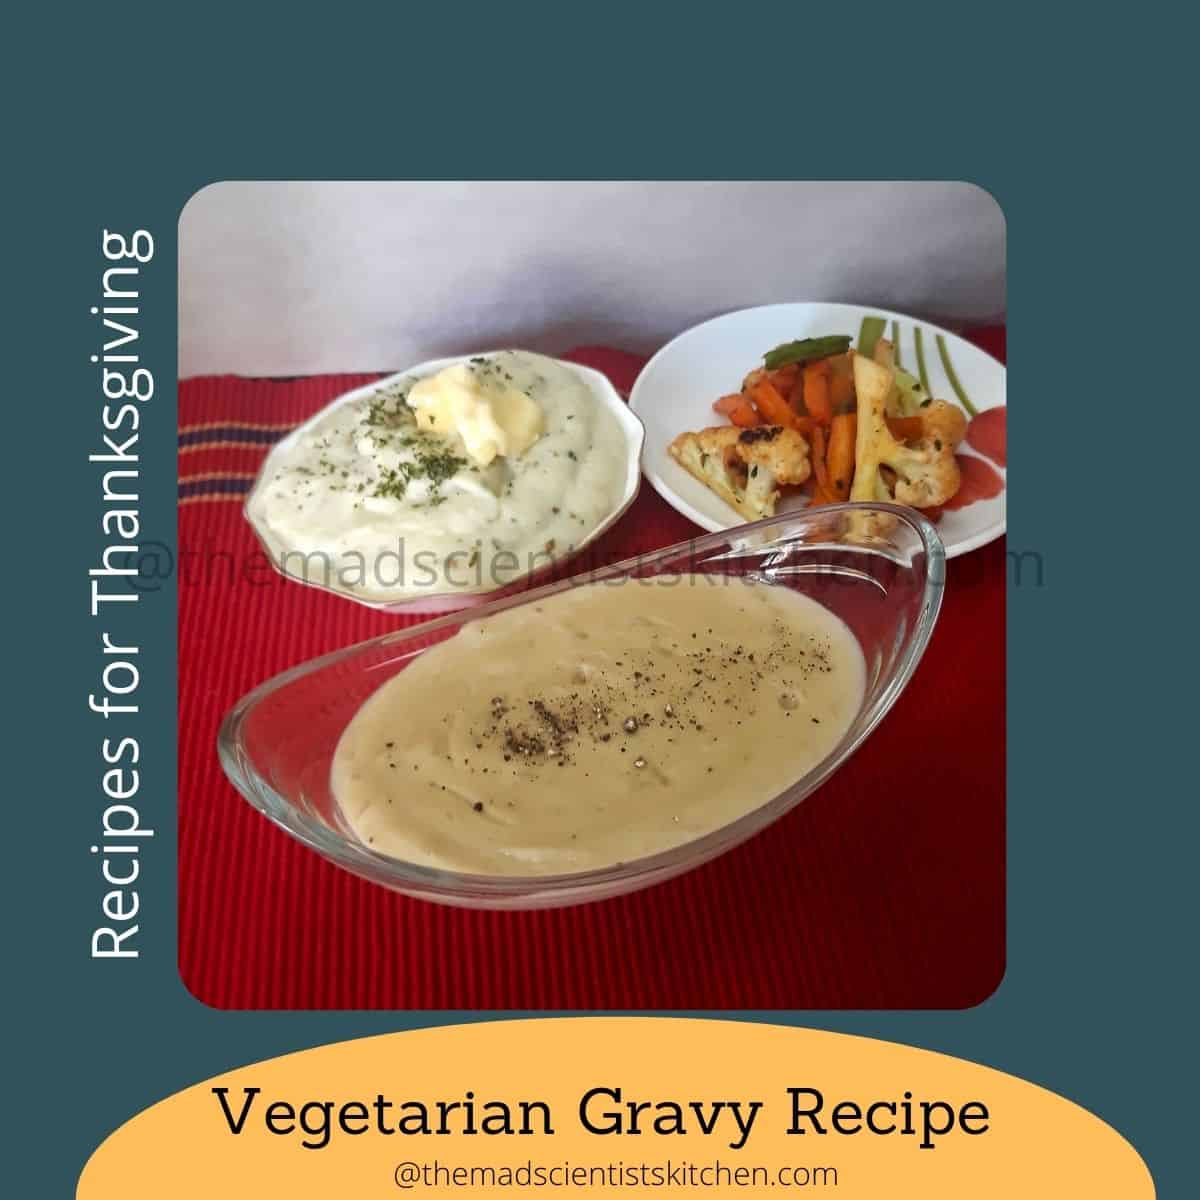 An easy, delicious vegetarian gravy recipe for Thanksgiving meal